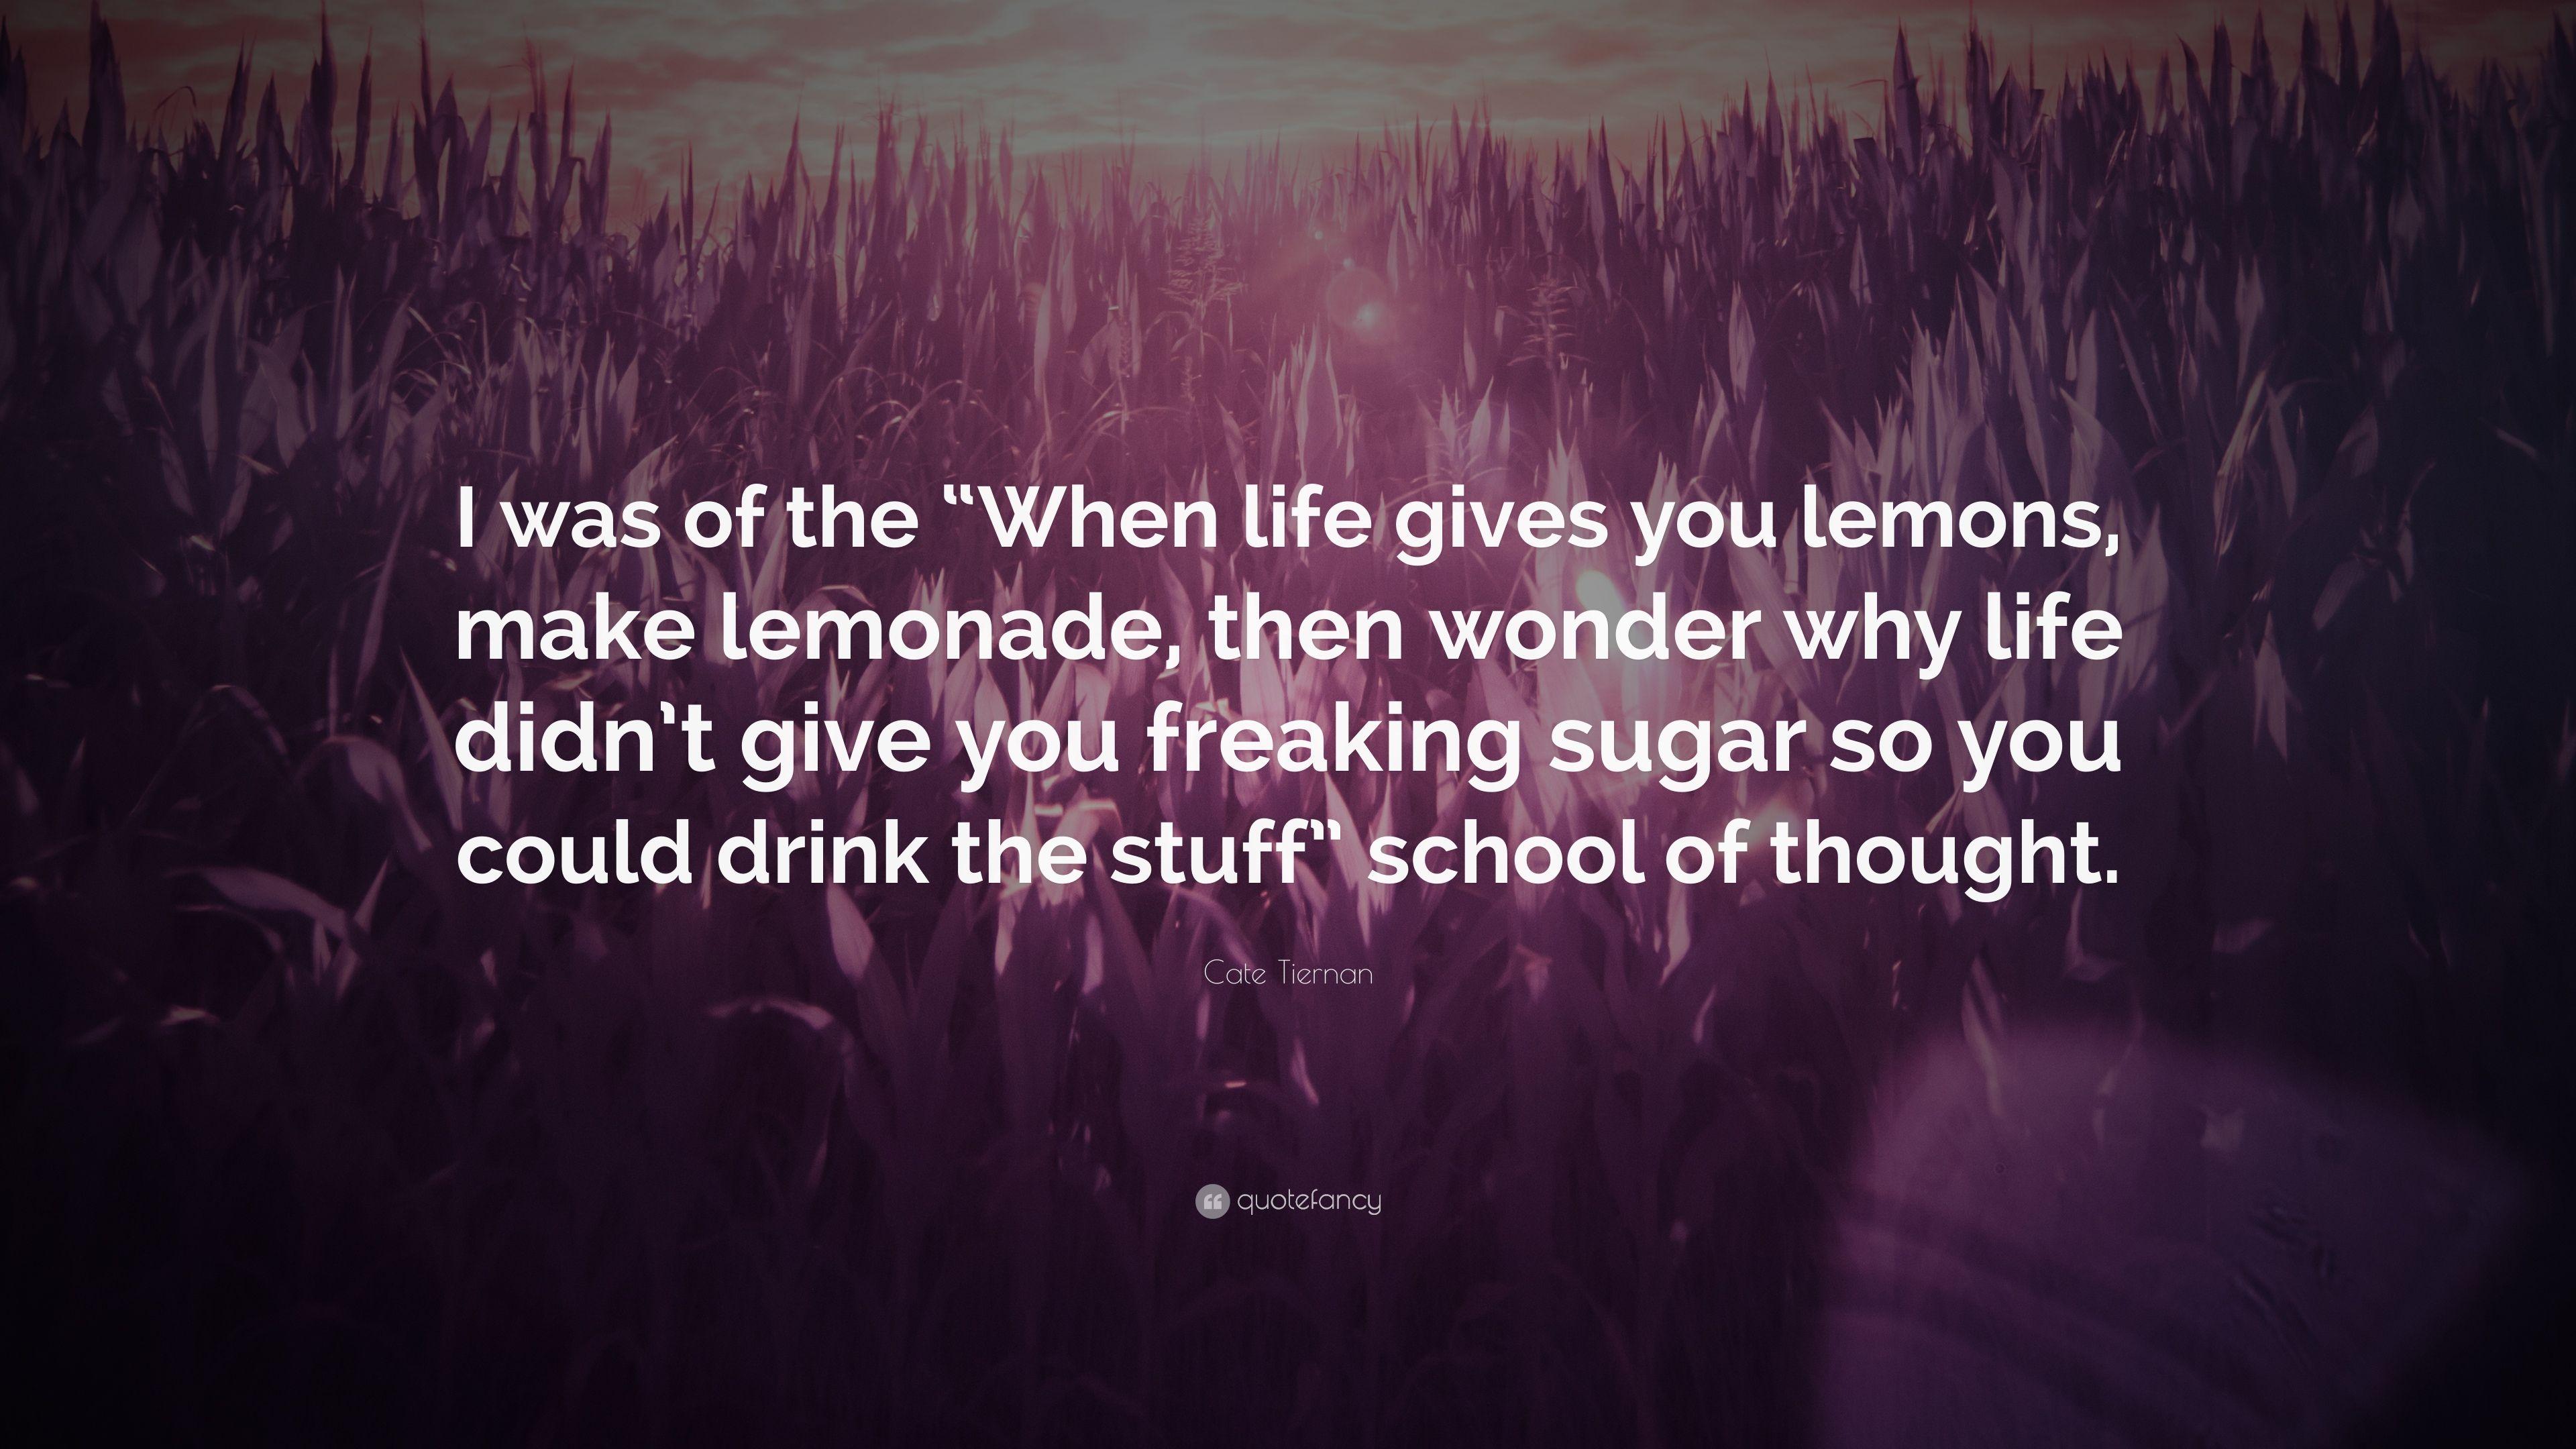 Cate Tiernan Quote: “I was of the “When life gives you lemons, make